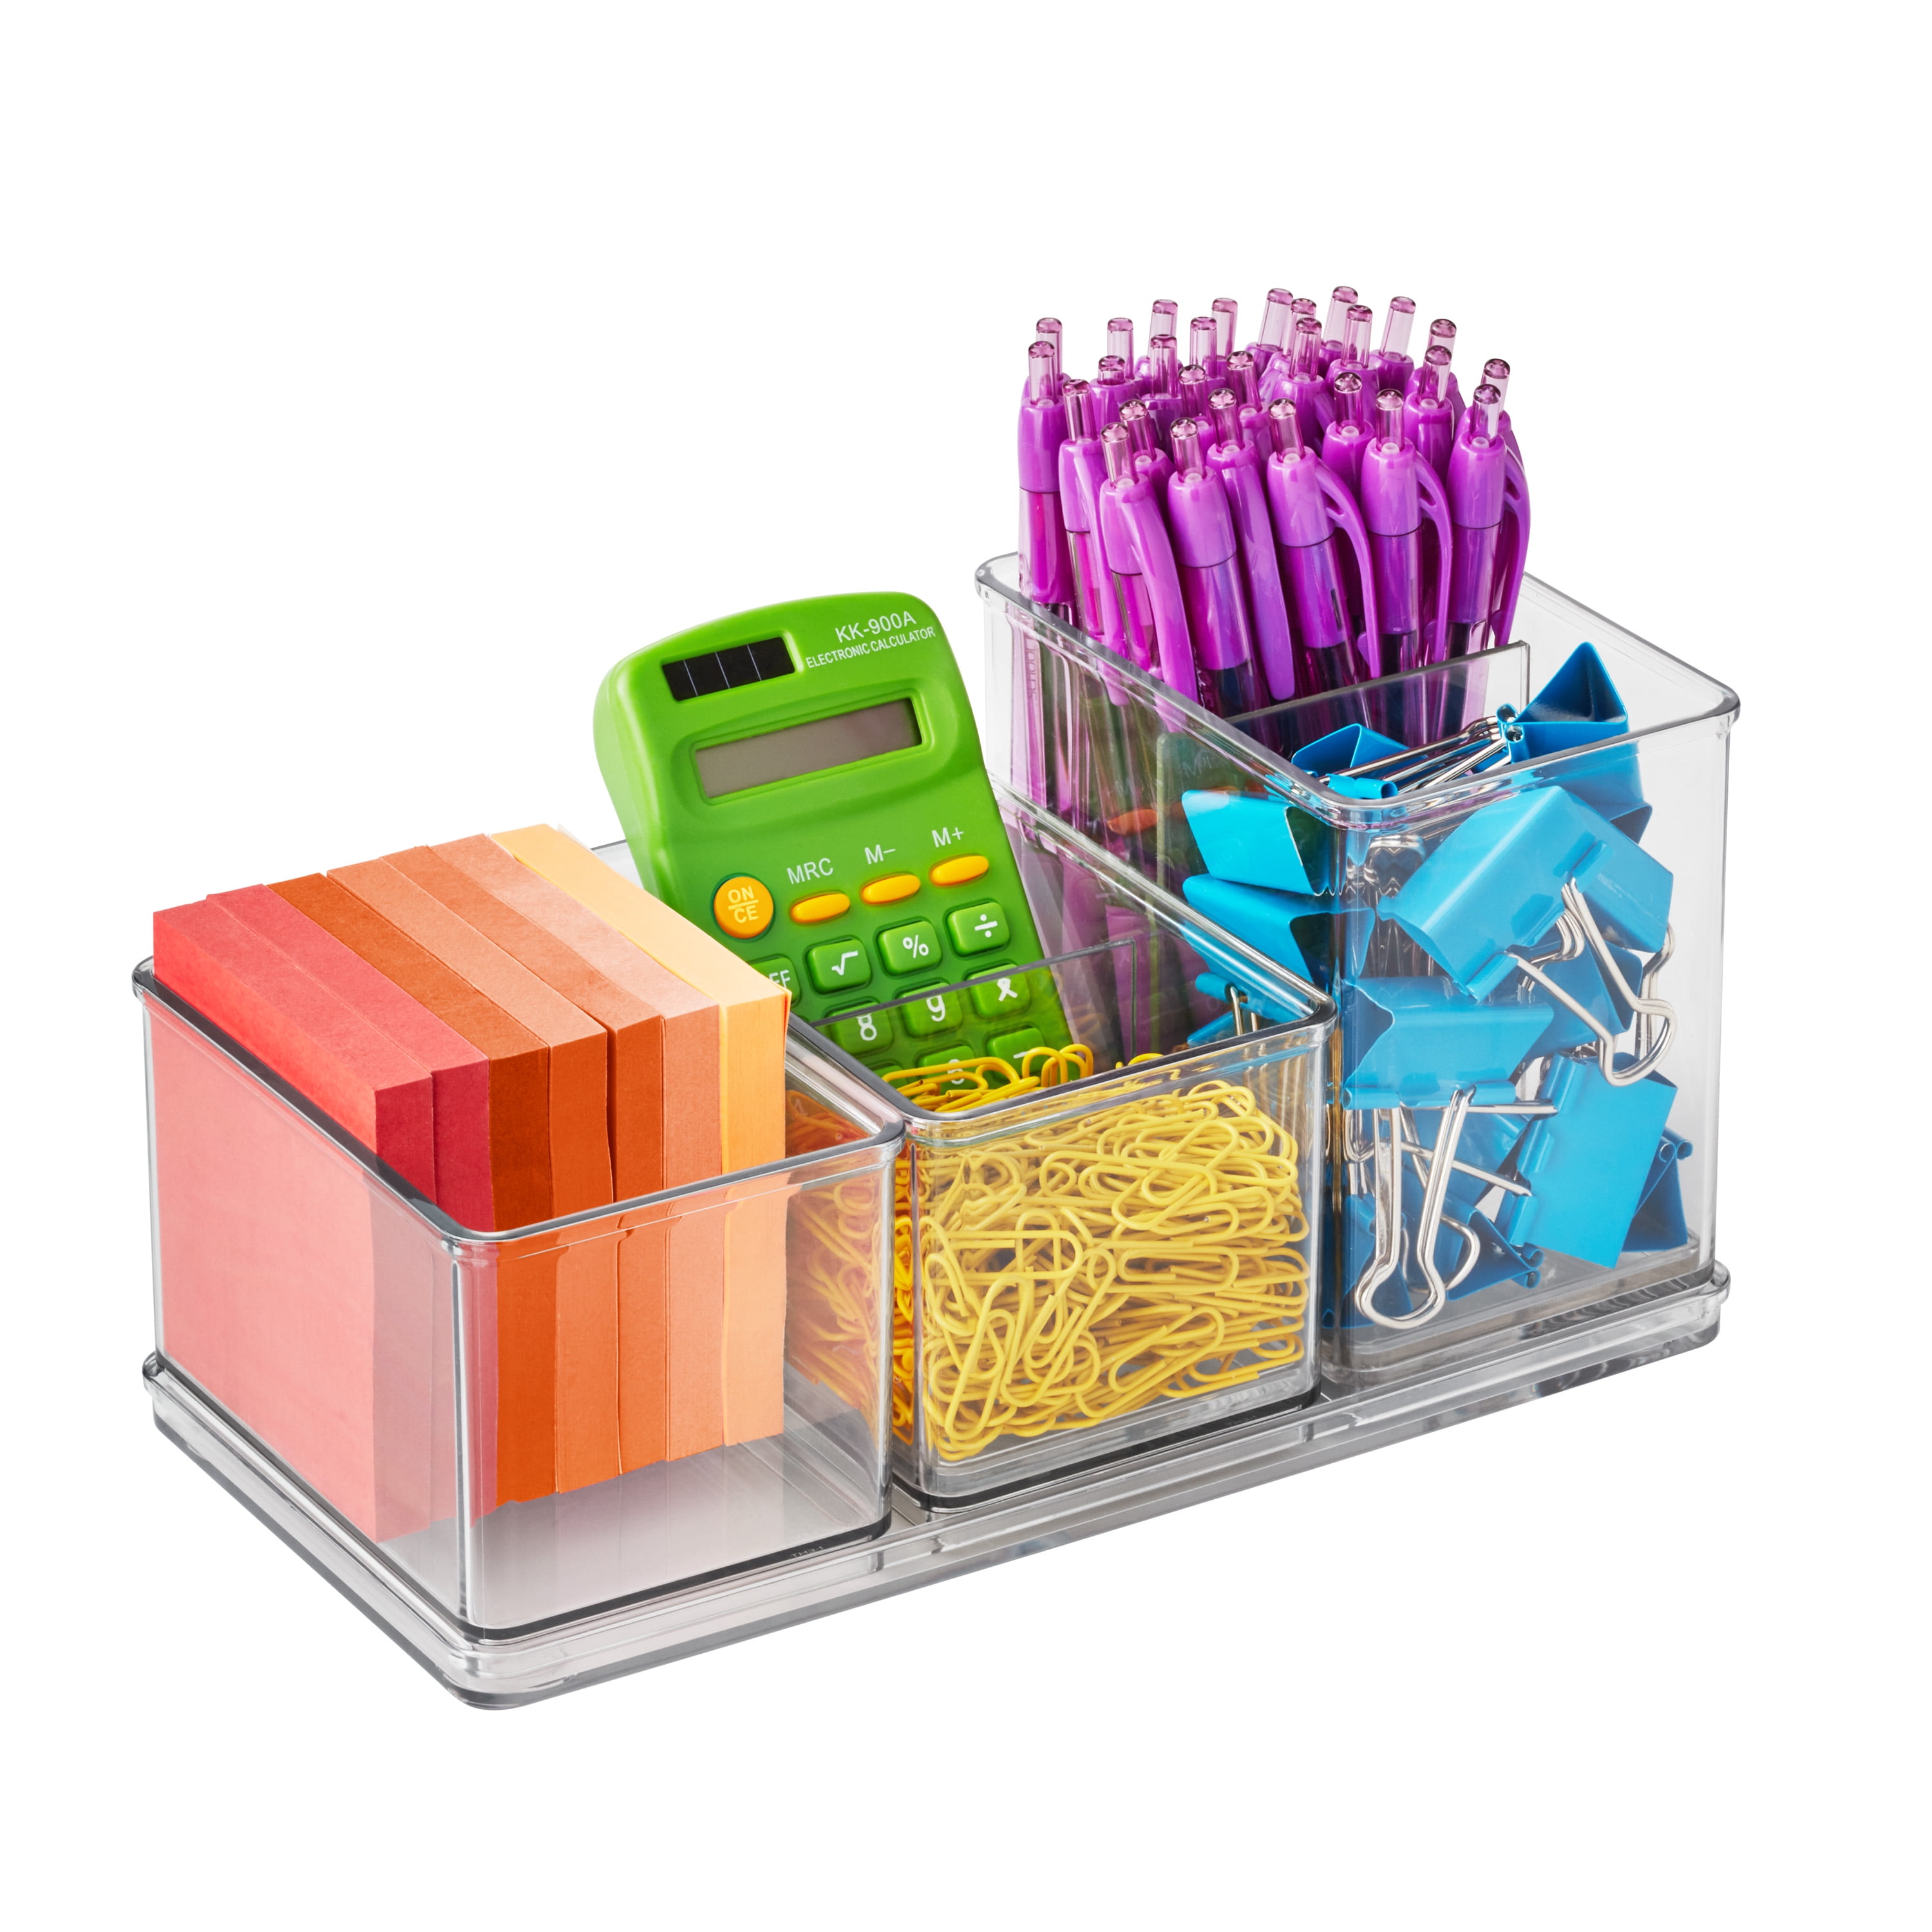 4-Piece The Home Edit Clear Plastic Storage System (Office Desktop Edit) $4.74 + Free S&H w/ Walmart+ or $35+